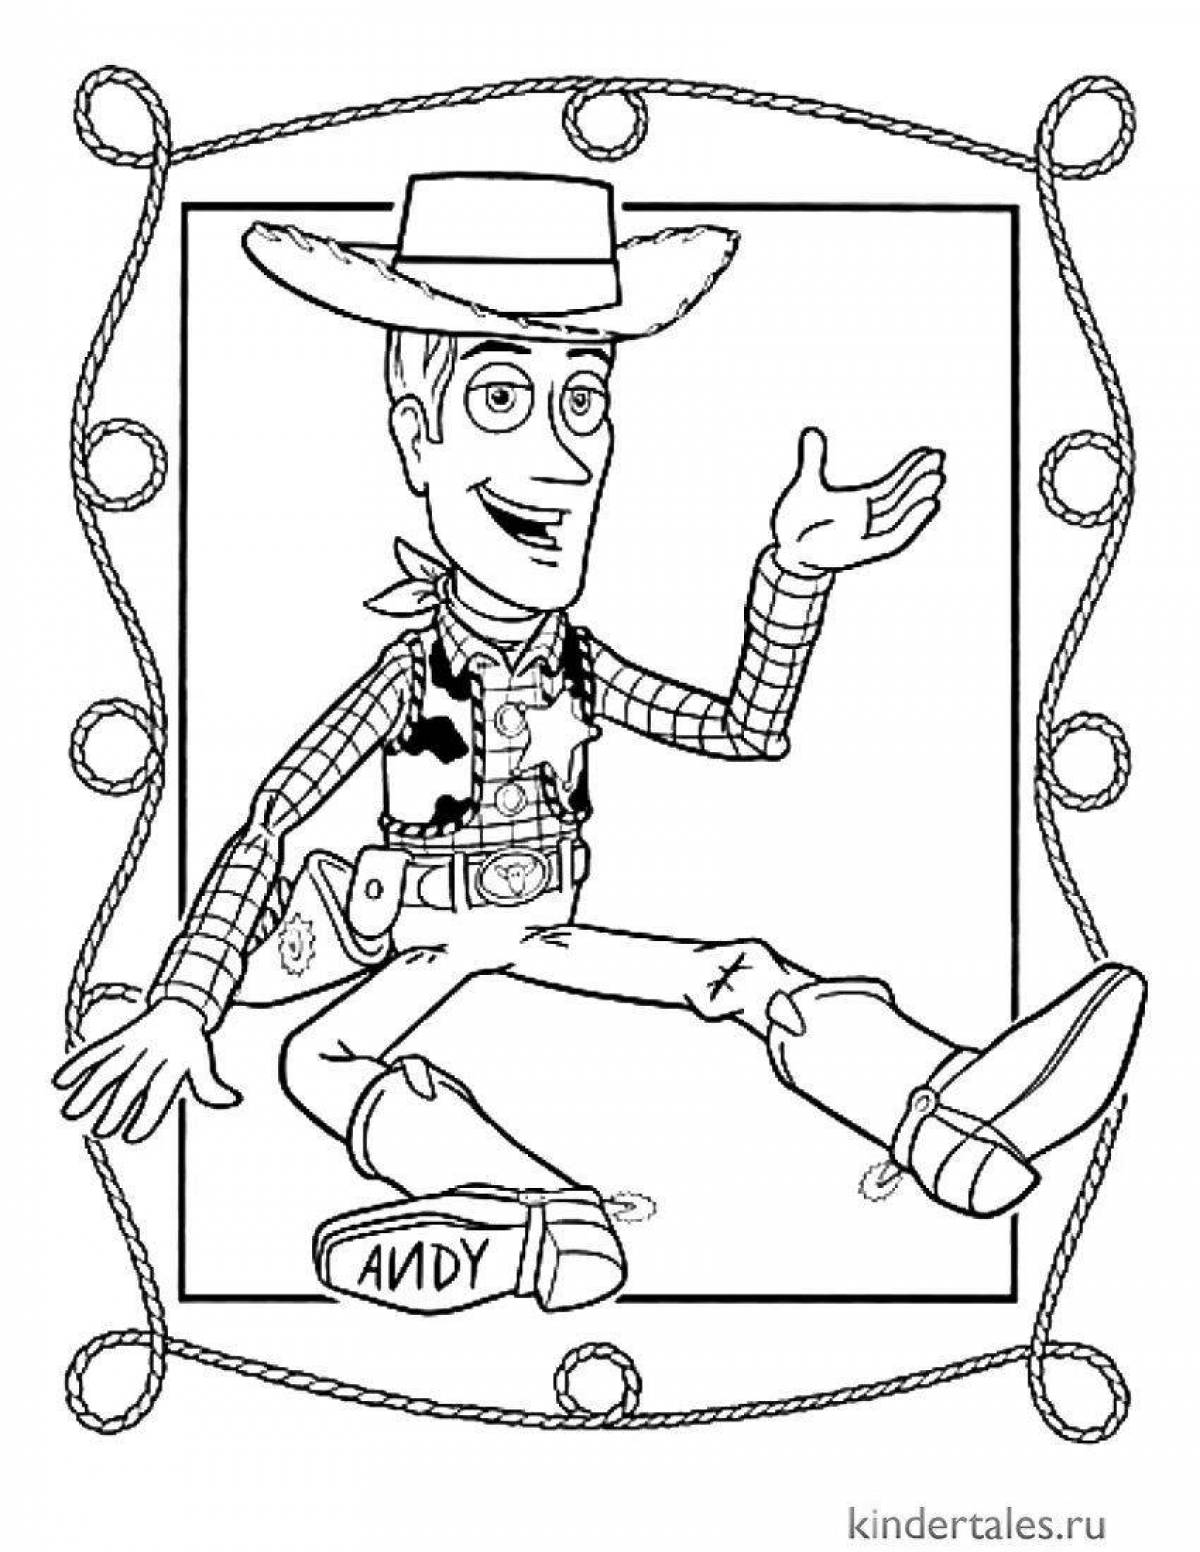 Heroic sheriff coloring page